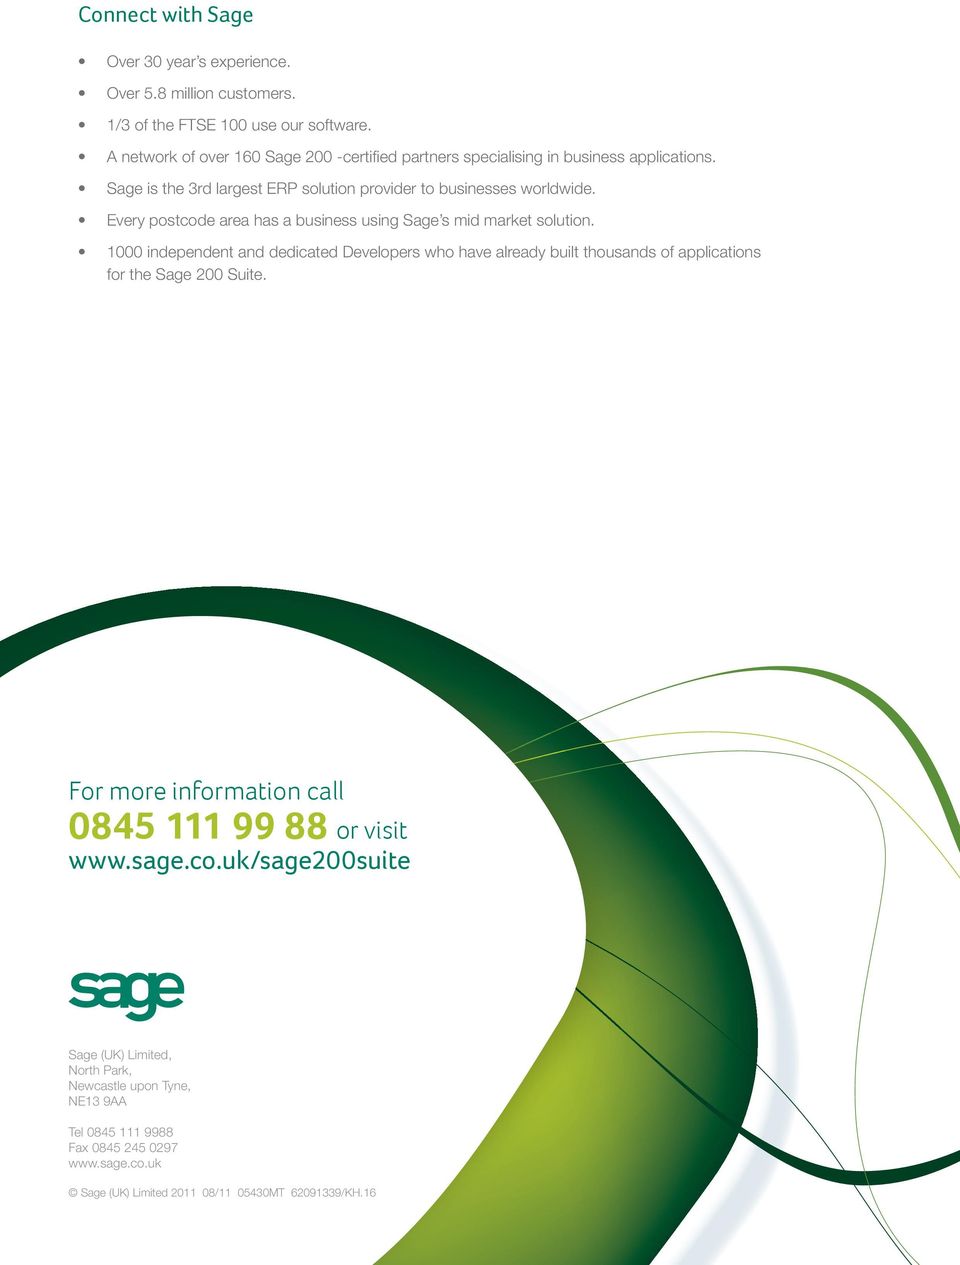 Every postcode area has a business using Sage s mid market solution.